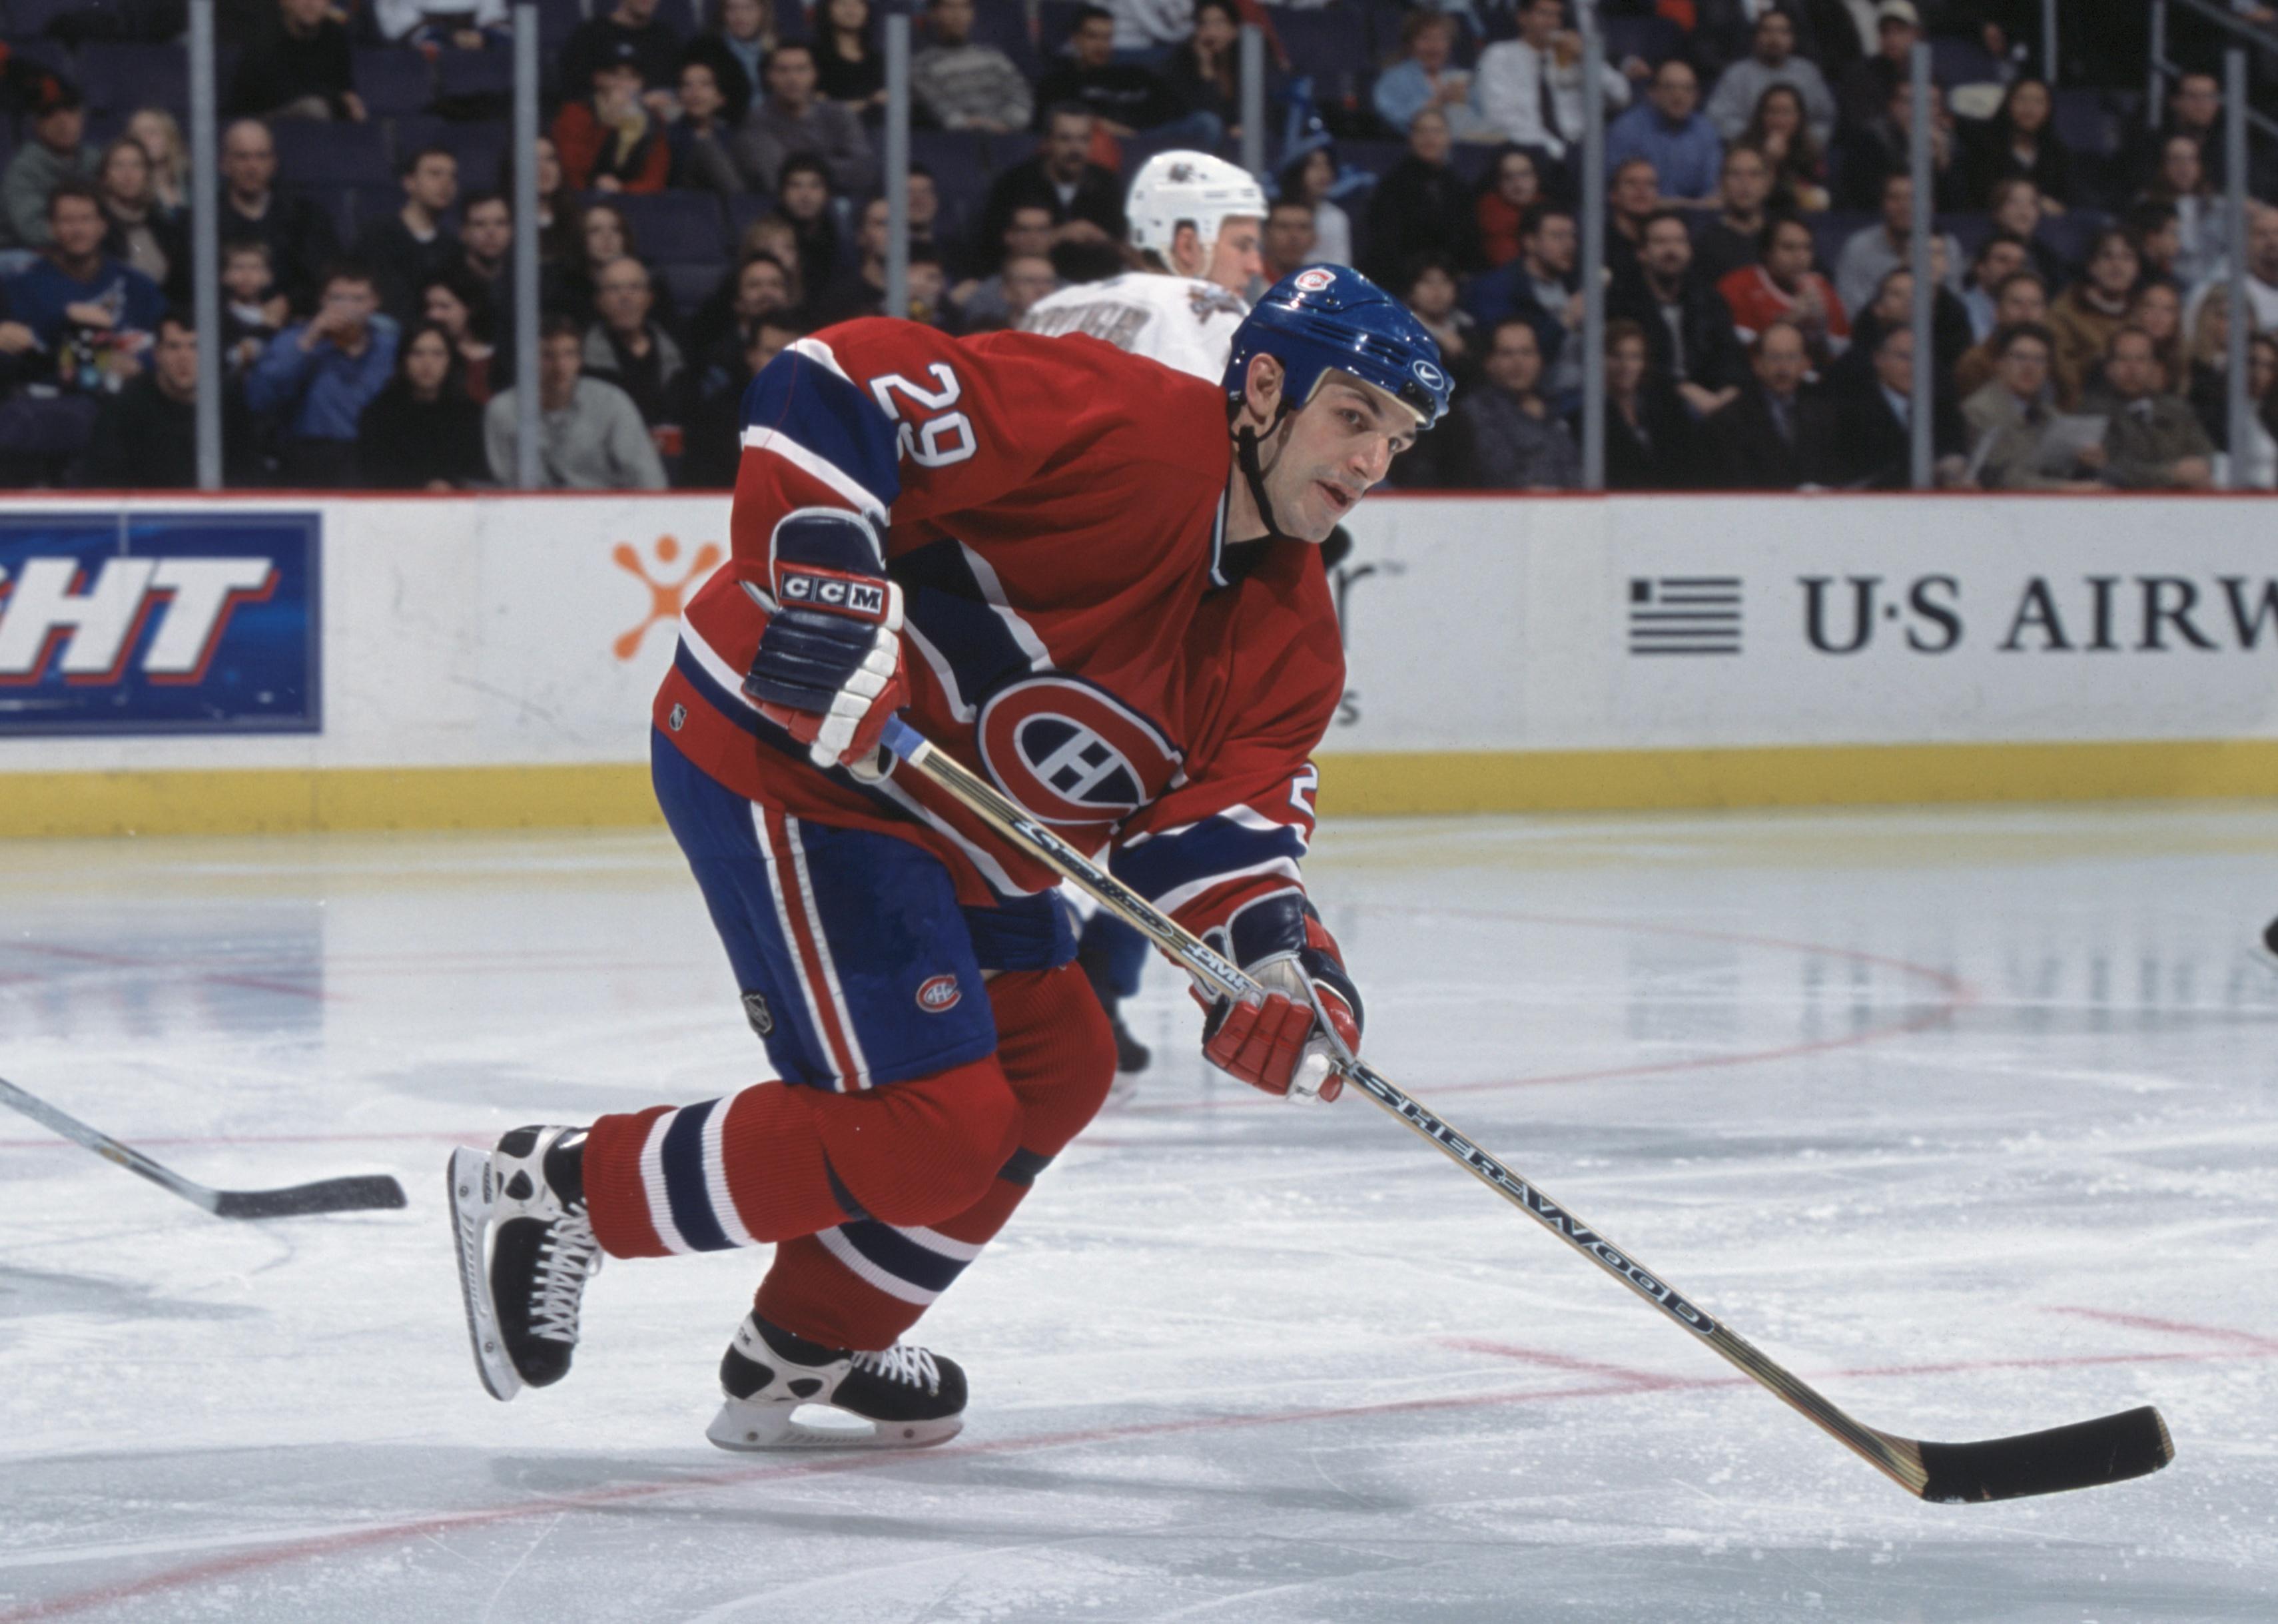 Gino Odjick of the Montreal Canadiens skates on the ice.